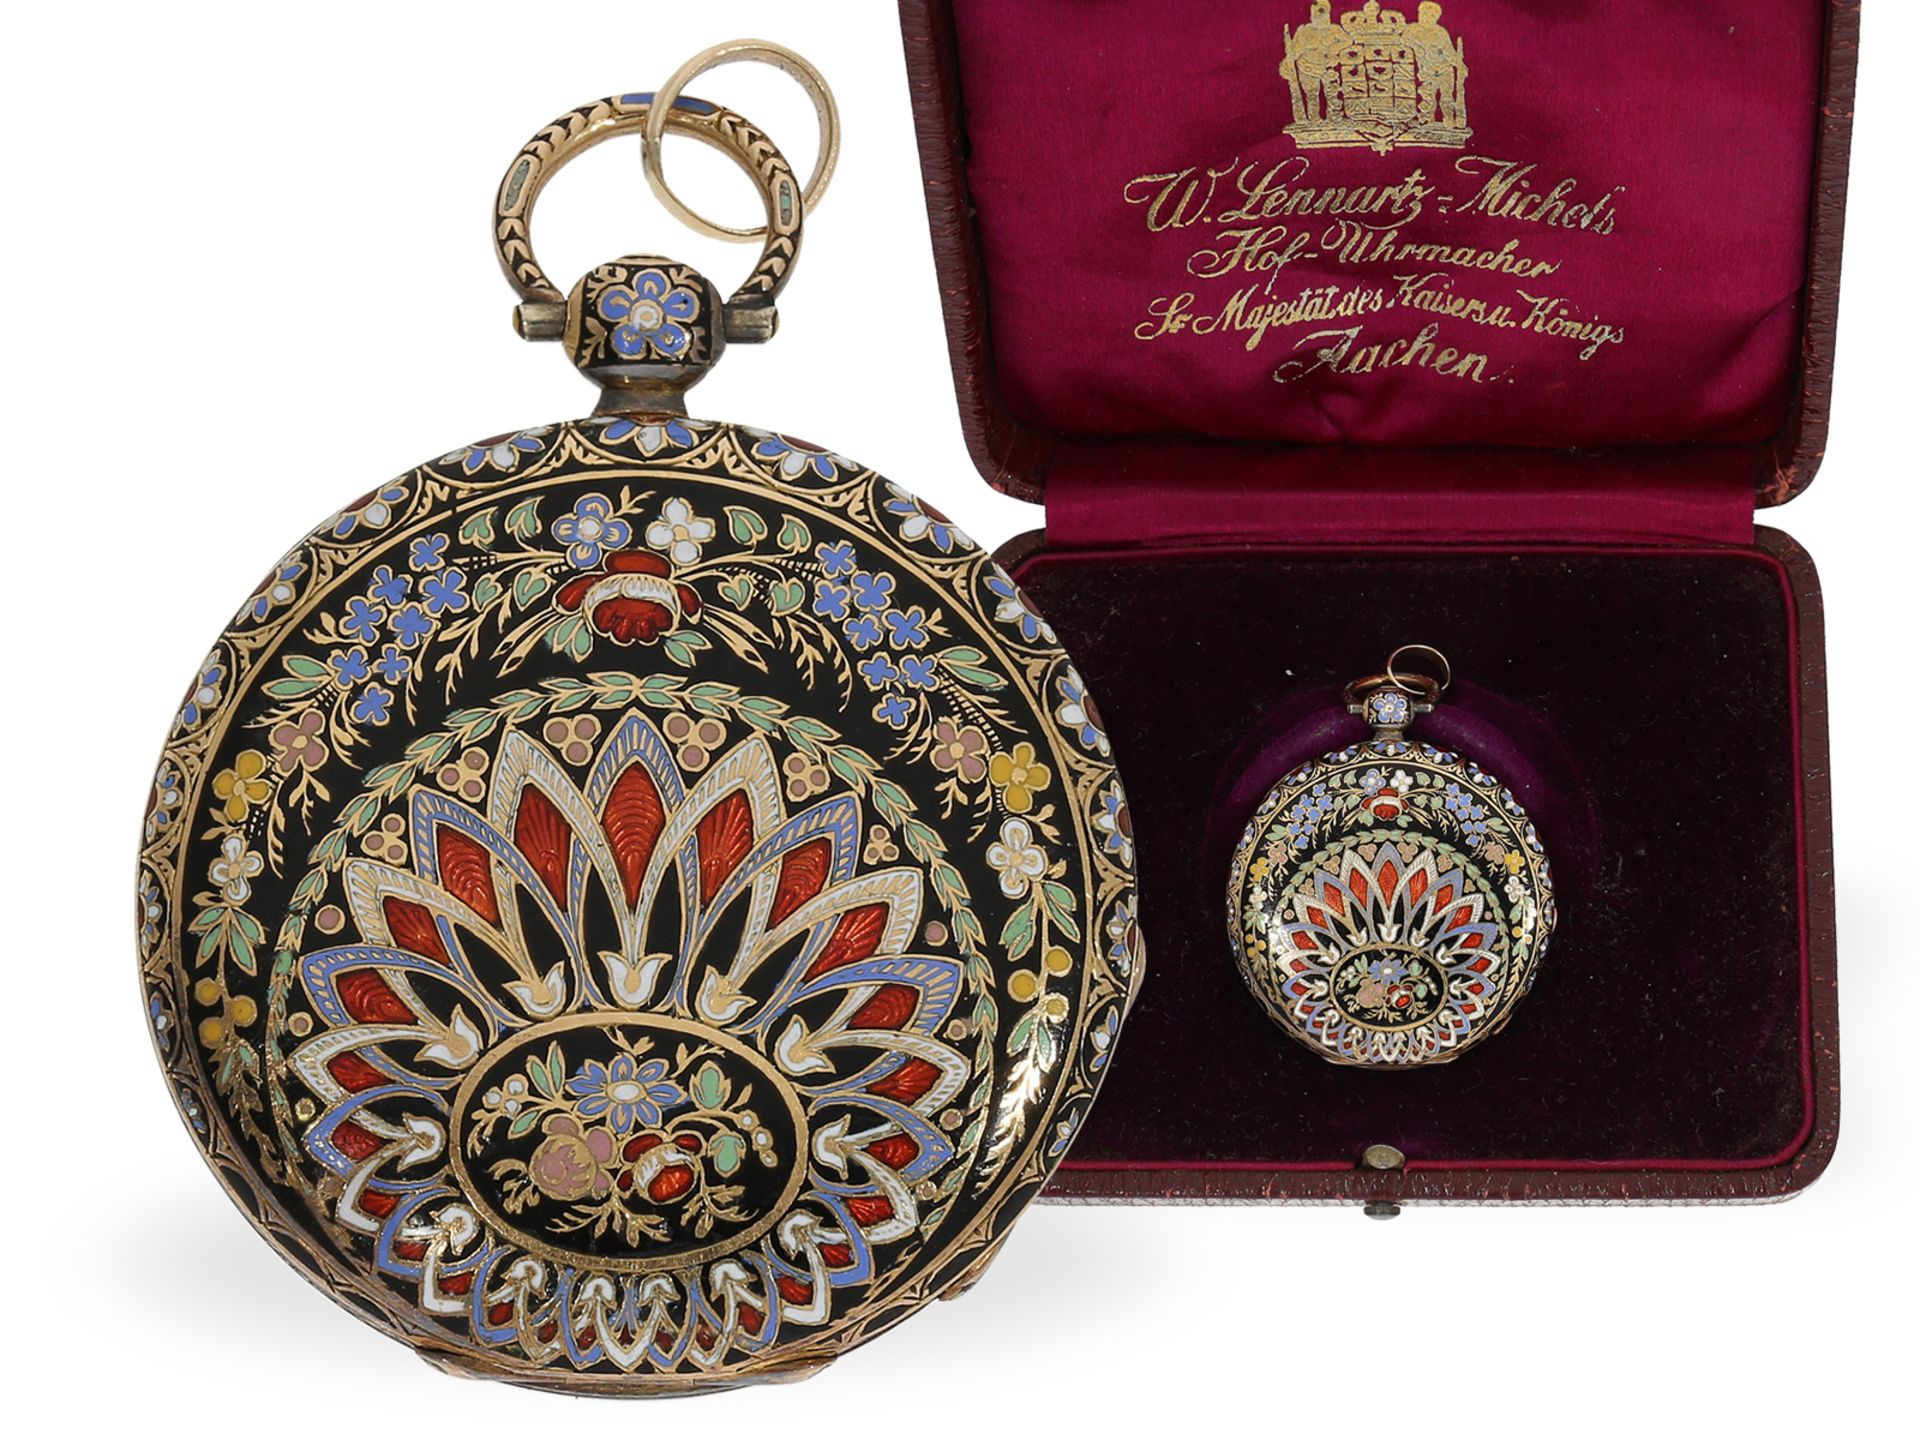 Pocket watch: magnificent gold/enamel lepine with original box and gold key, ca. 1820